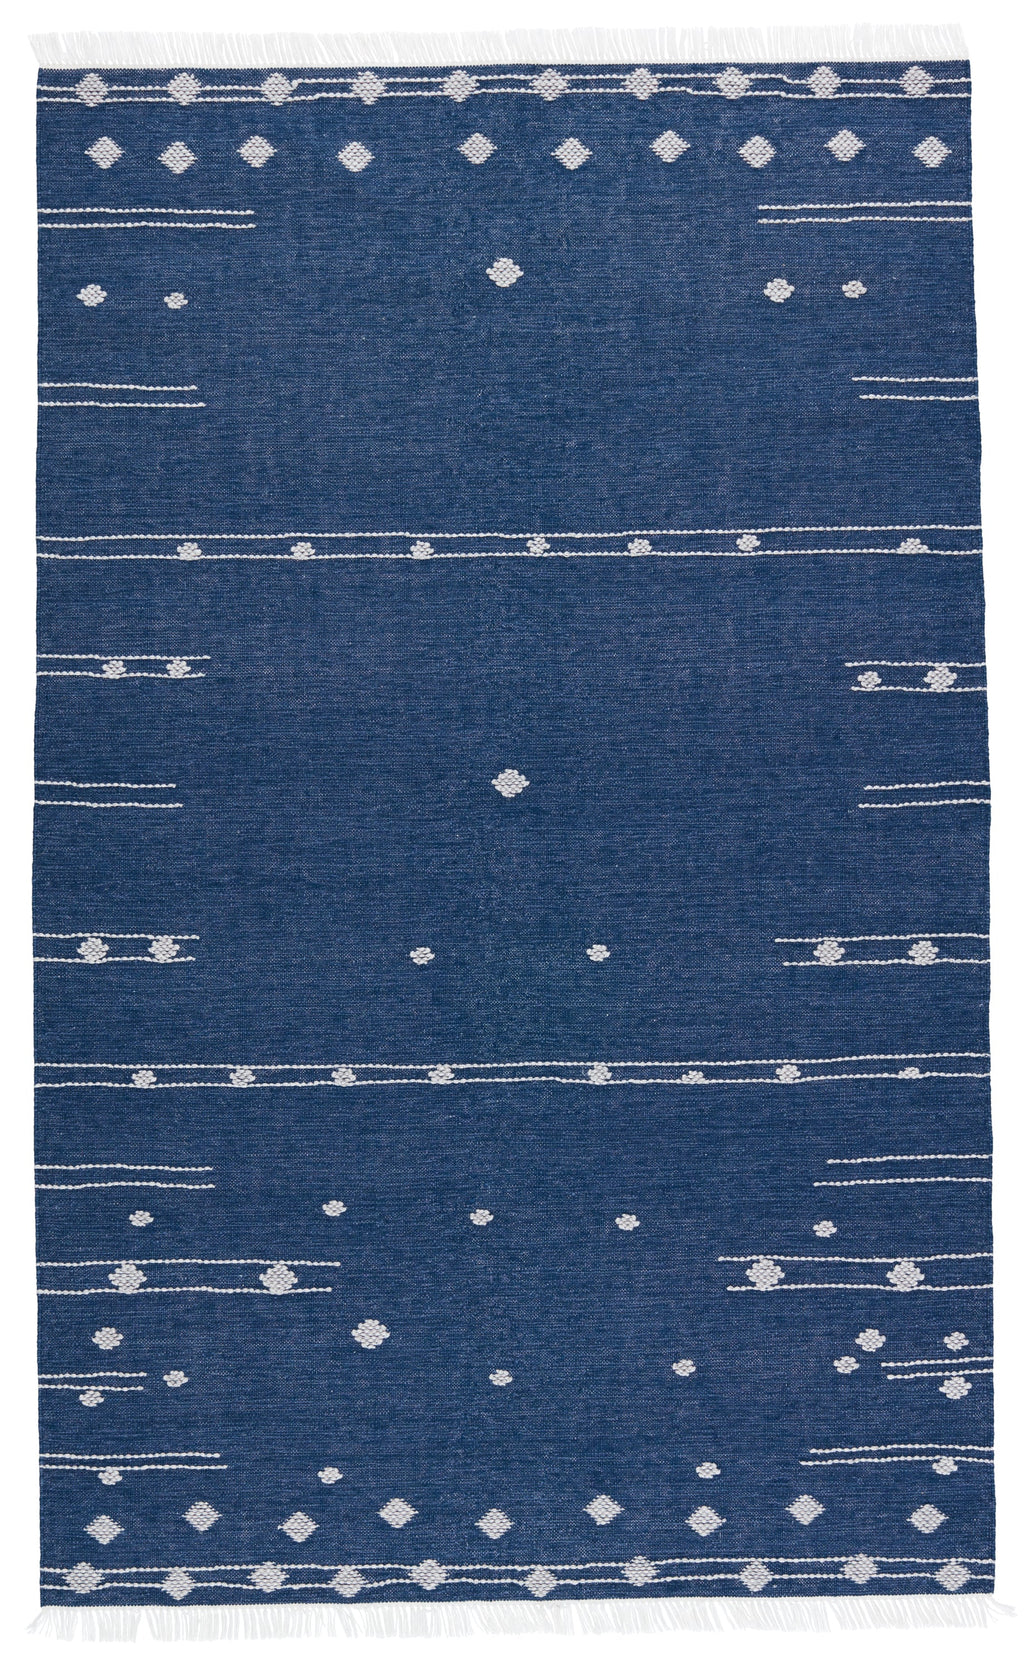 Calli Indoor/Outdoor Geometric Blue & White Rug by Jaipur Living